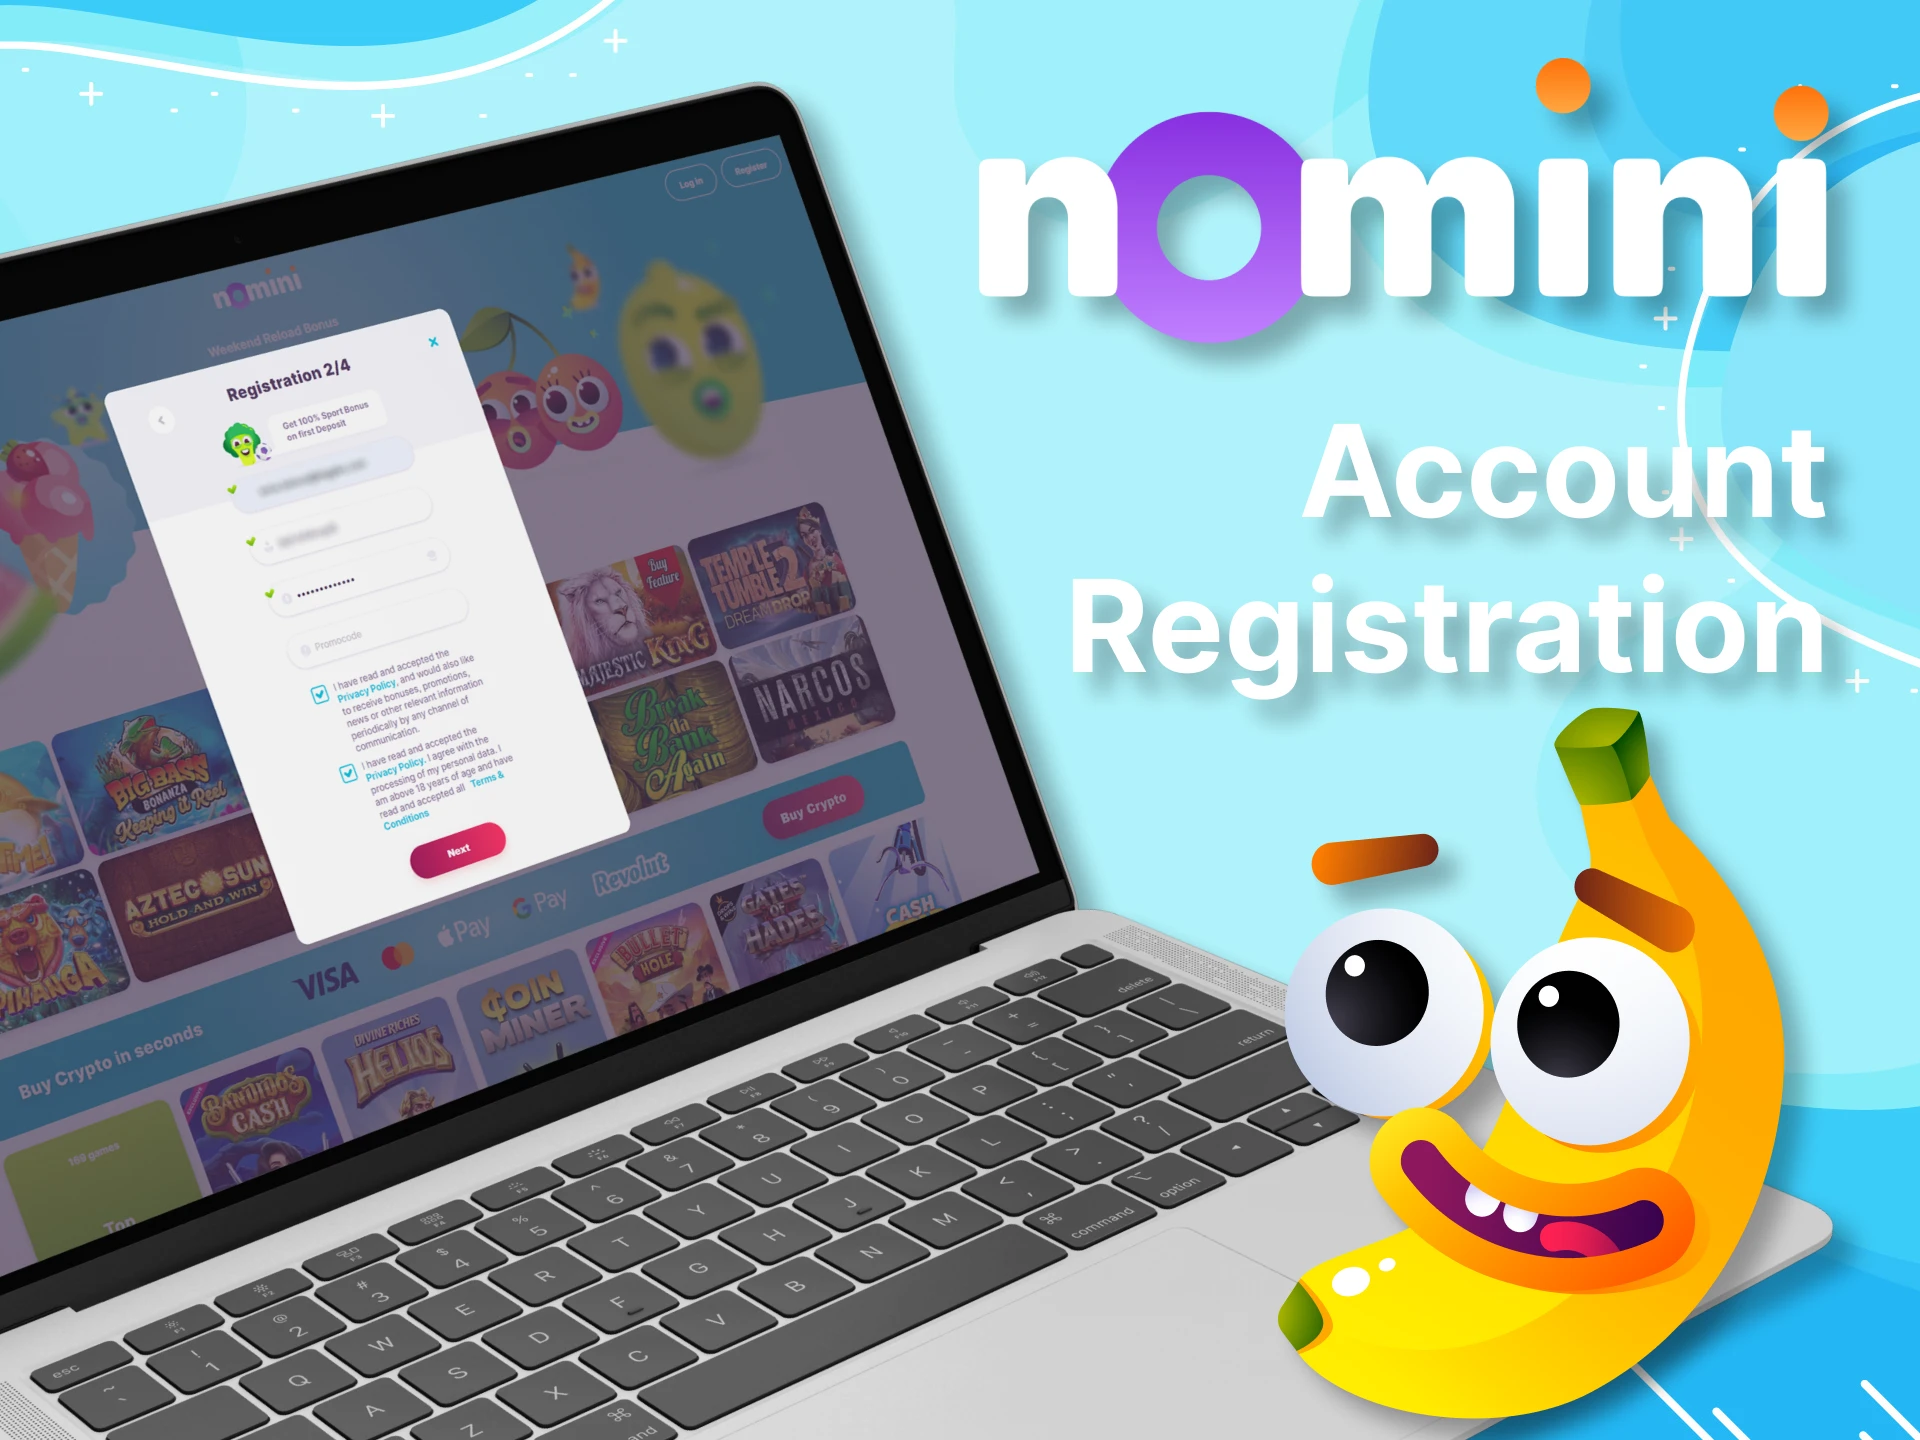 Complete a simple registration process at Nomini.